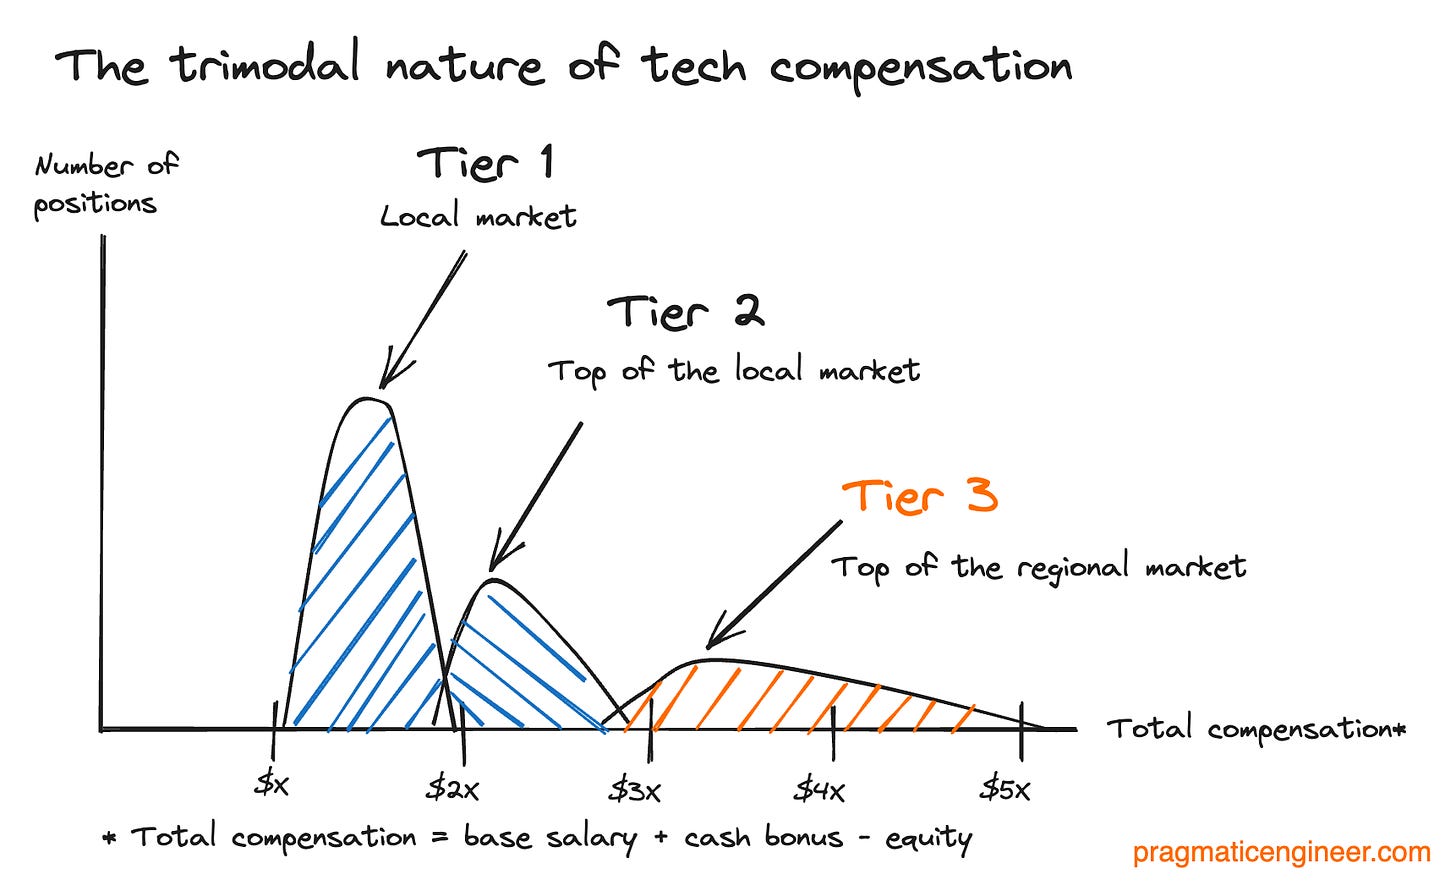 The trimodal nature of tech compensation. Tier 3 compensation changes greatly impact the rest of the market